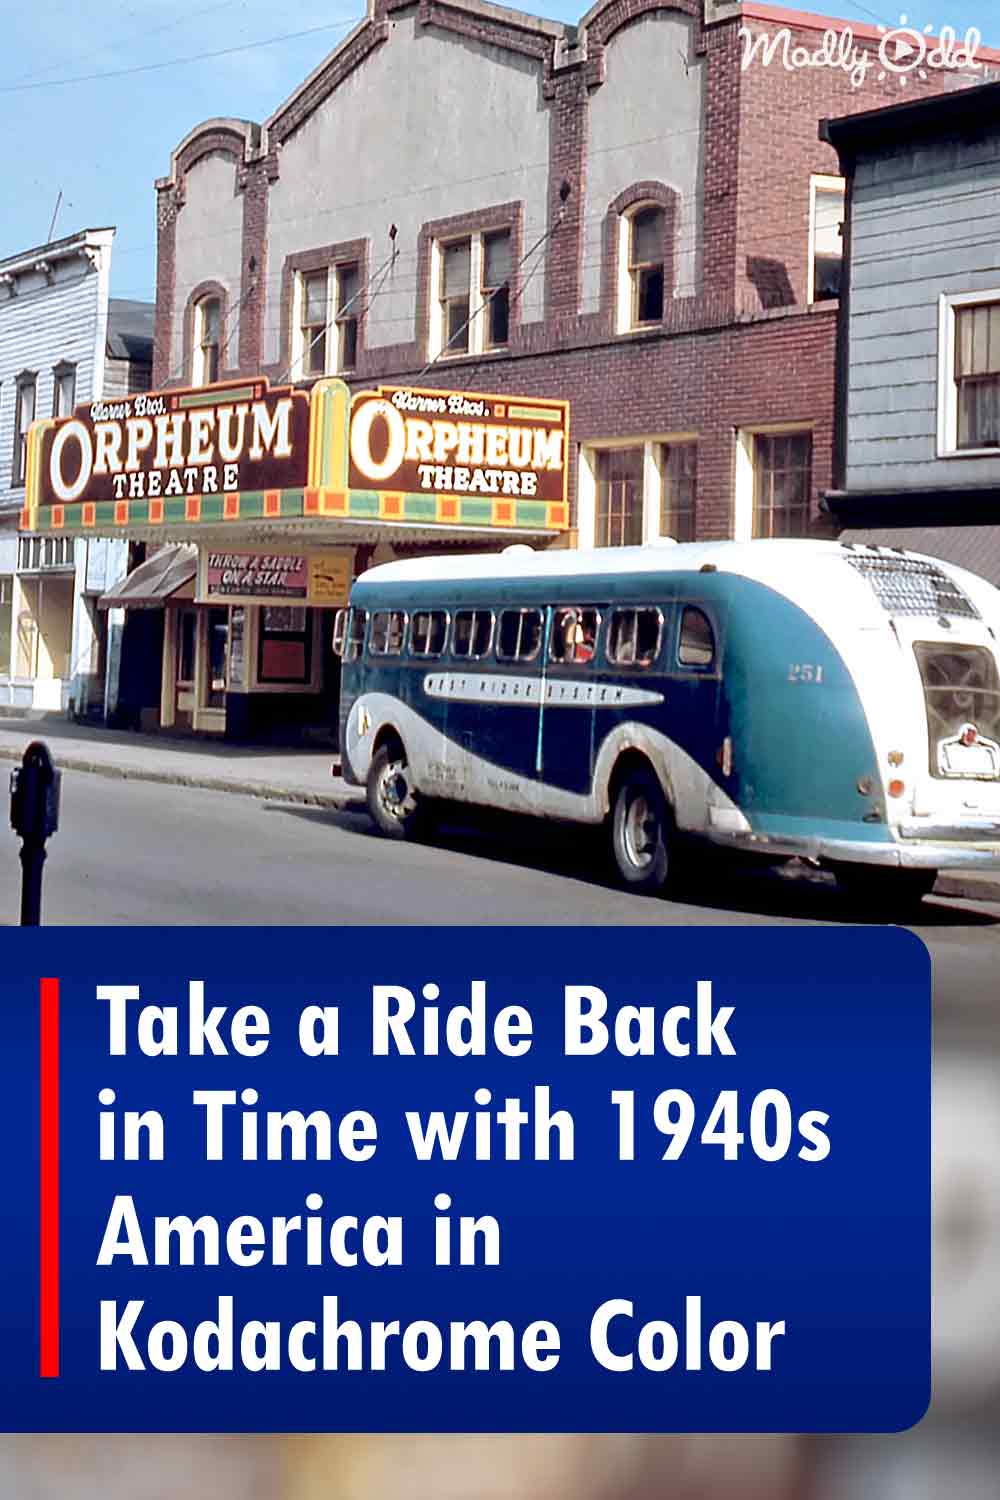 Take a Ride Back in Time with 1940s America in Kodachrome Color